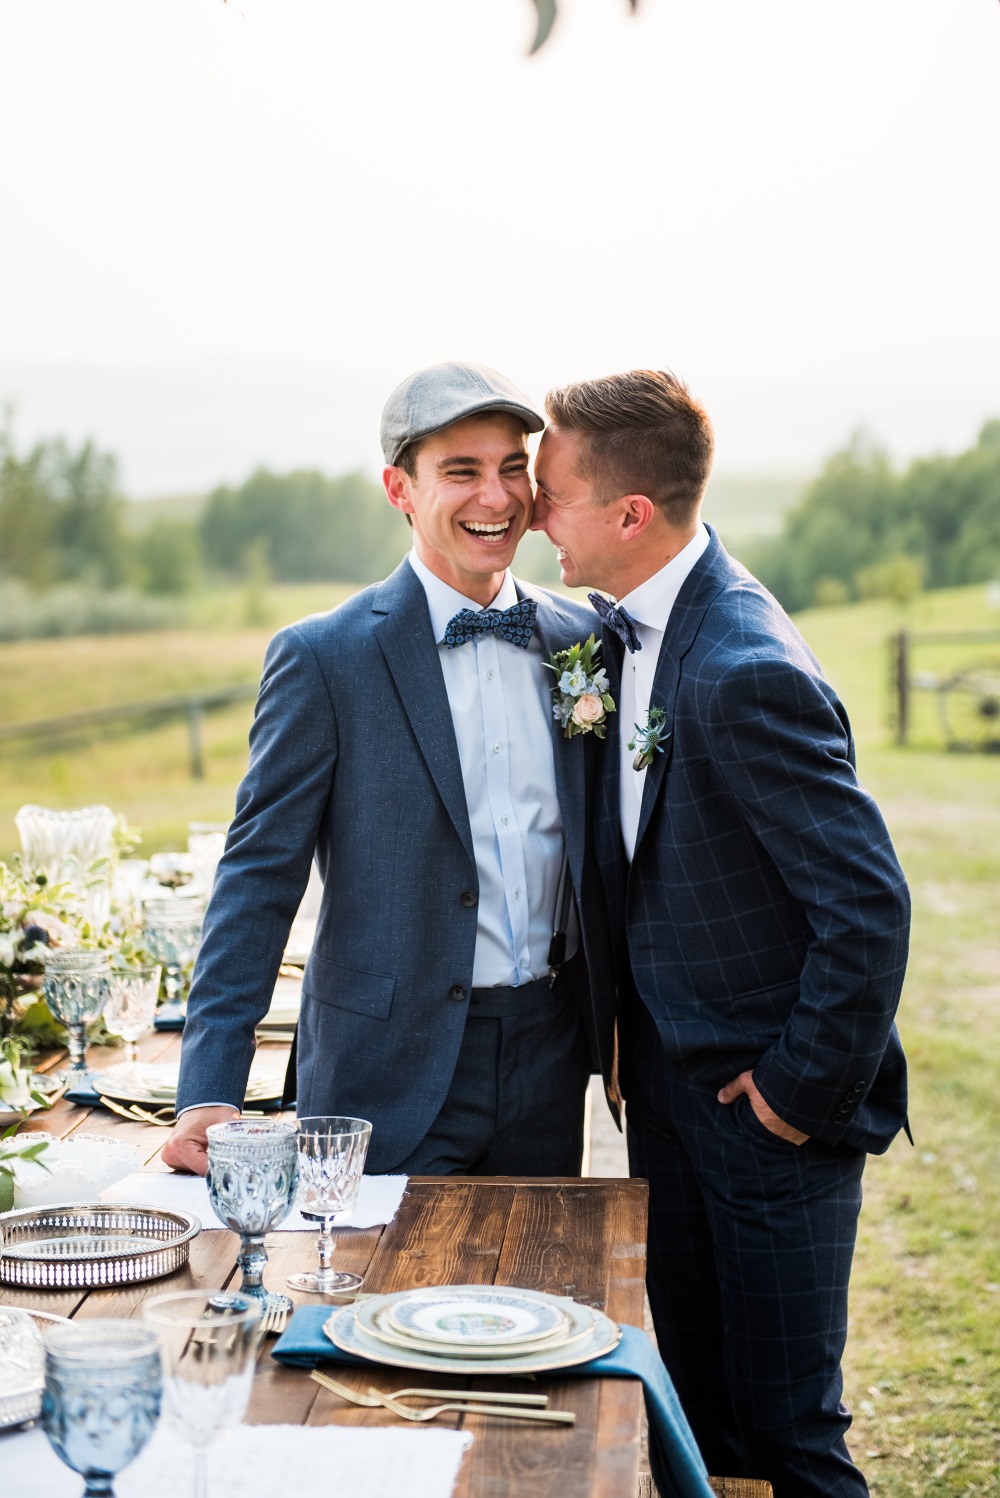 adorable rustic wedding ideas for the Mr. and Mr.